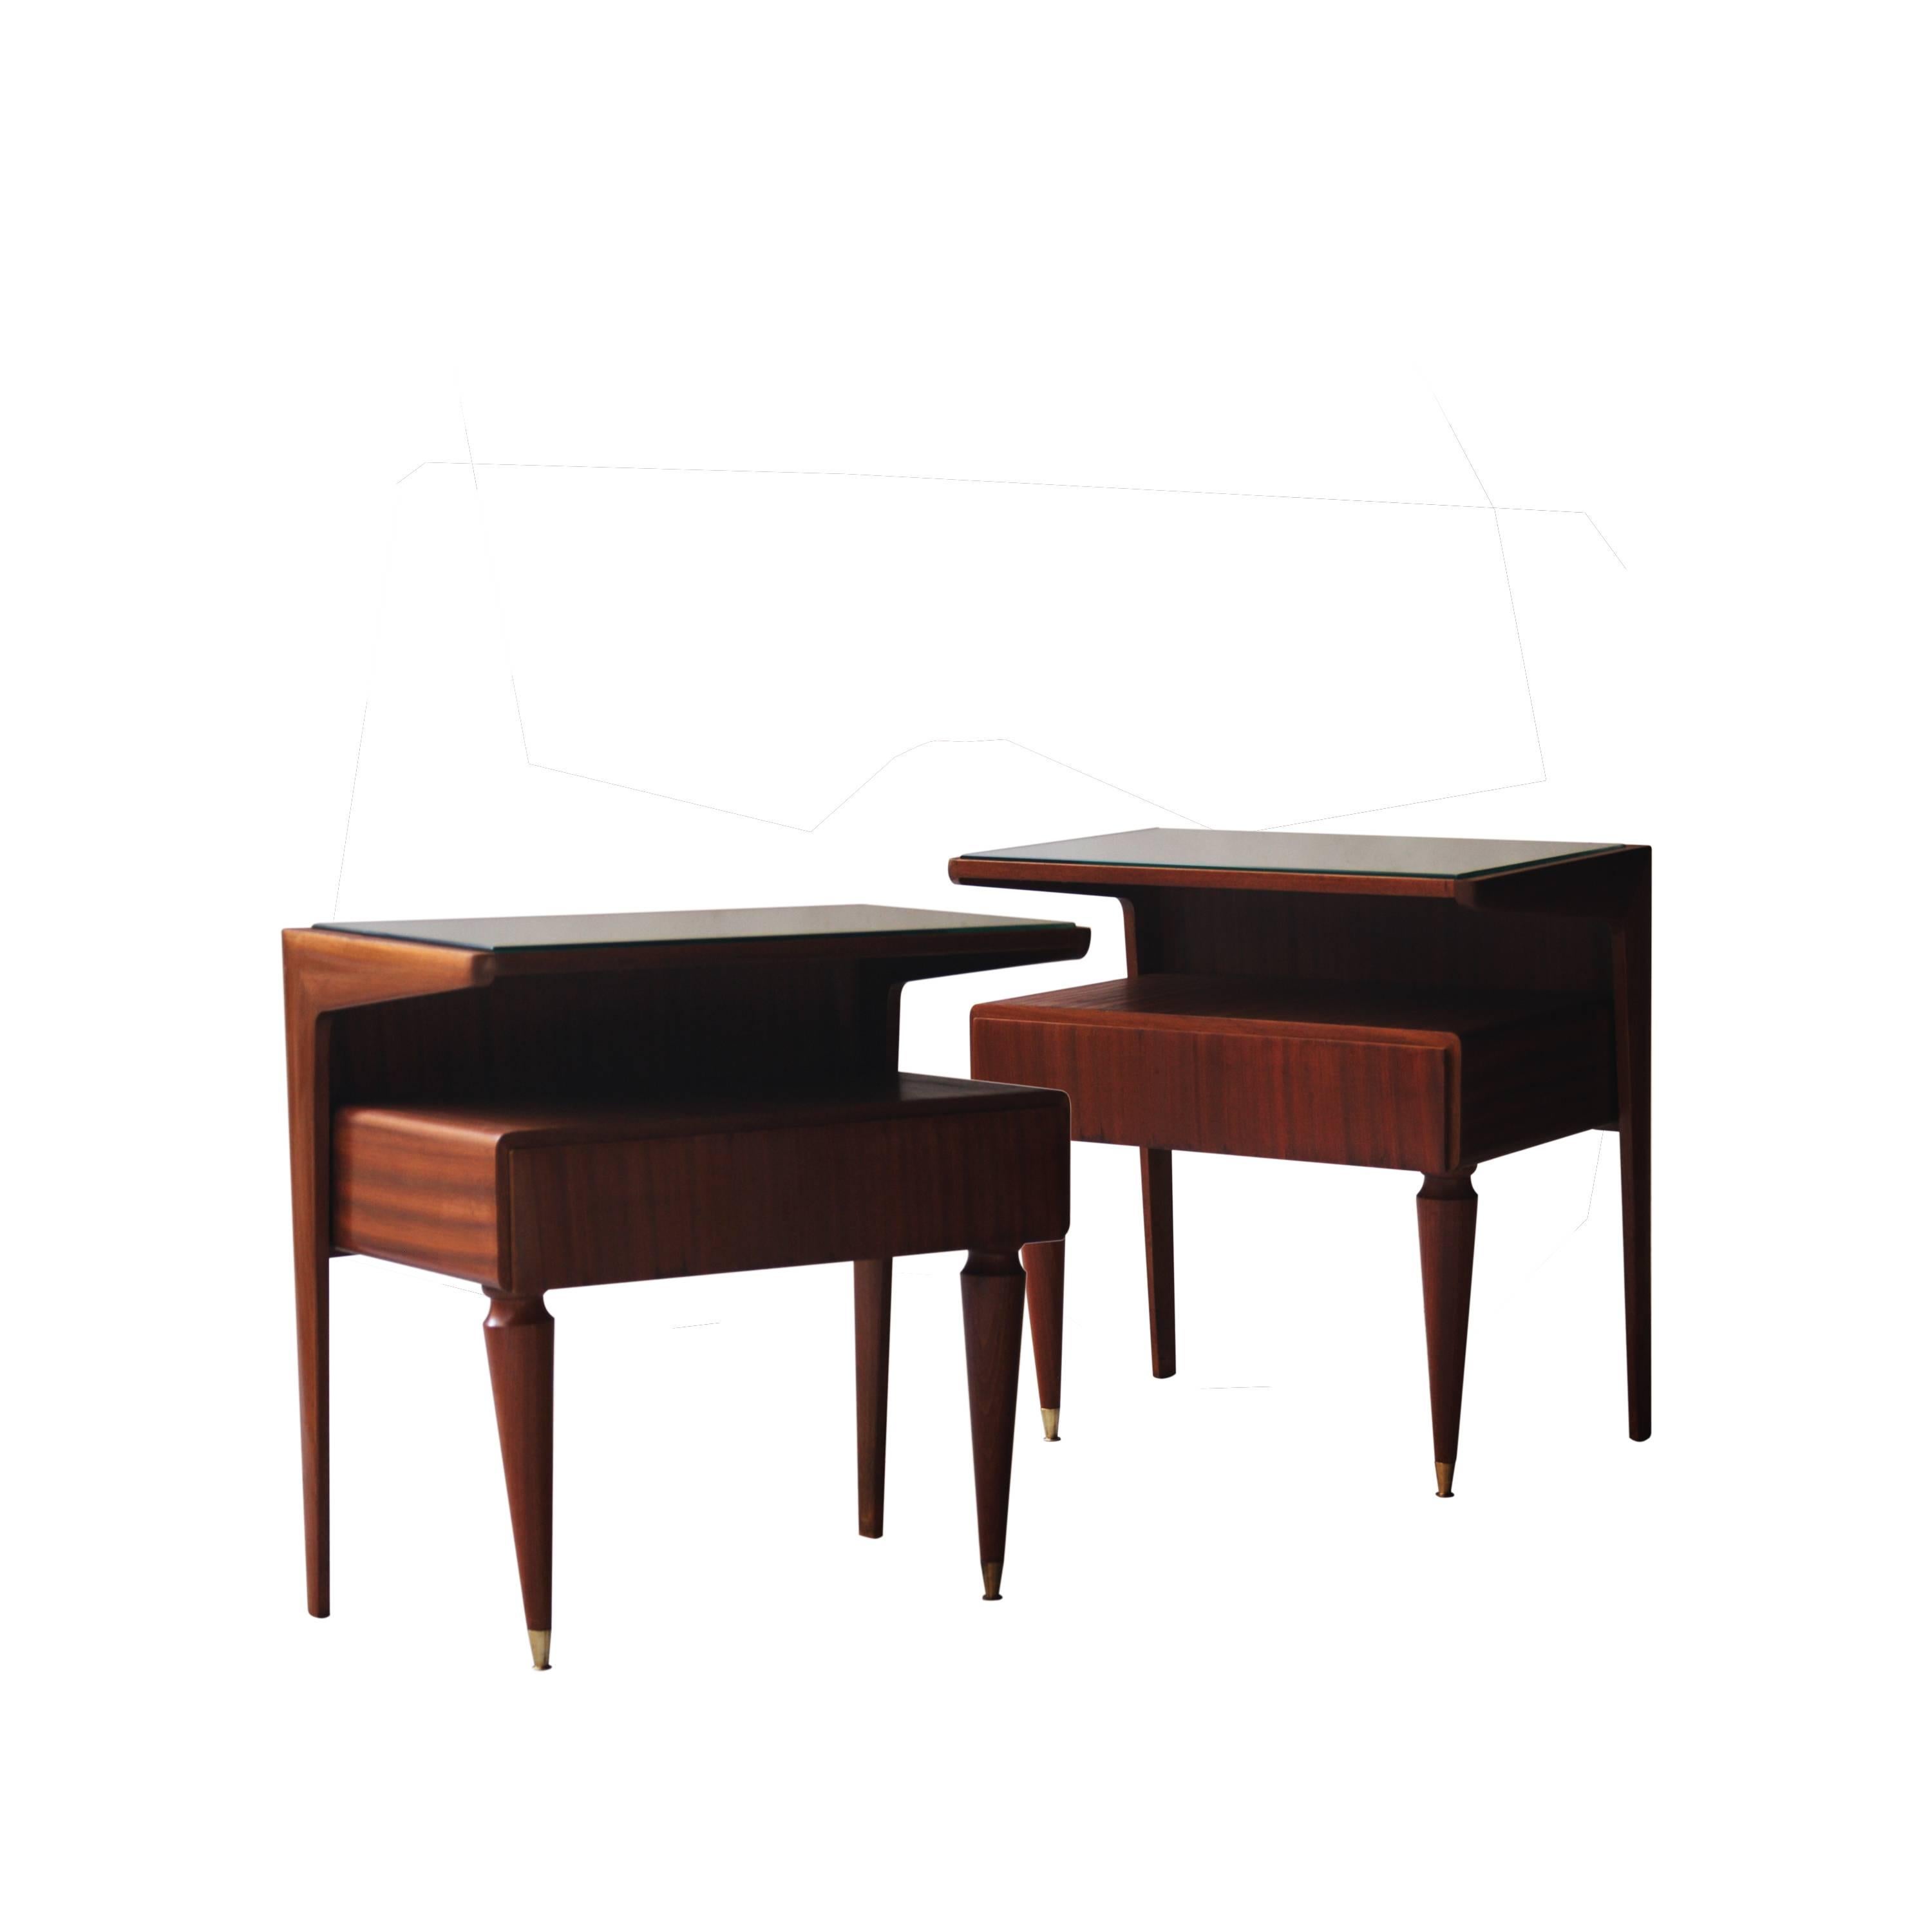 Pair of night tables made of rosewood, with conical leg finished in brass detail. With drawer and mirror glass top.